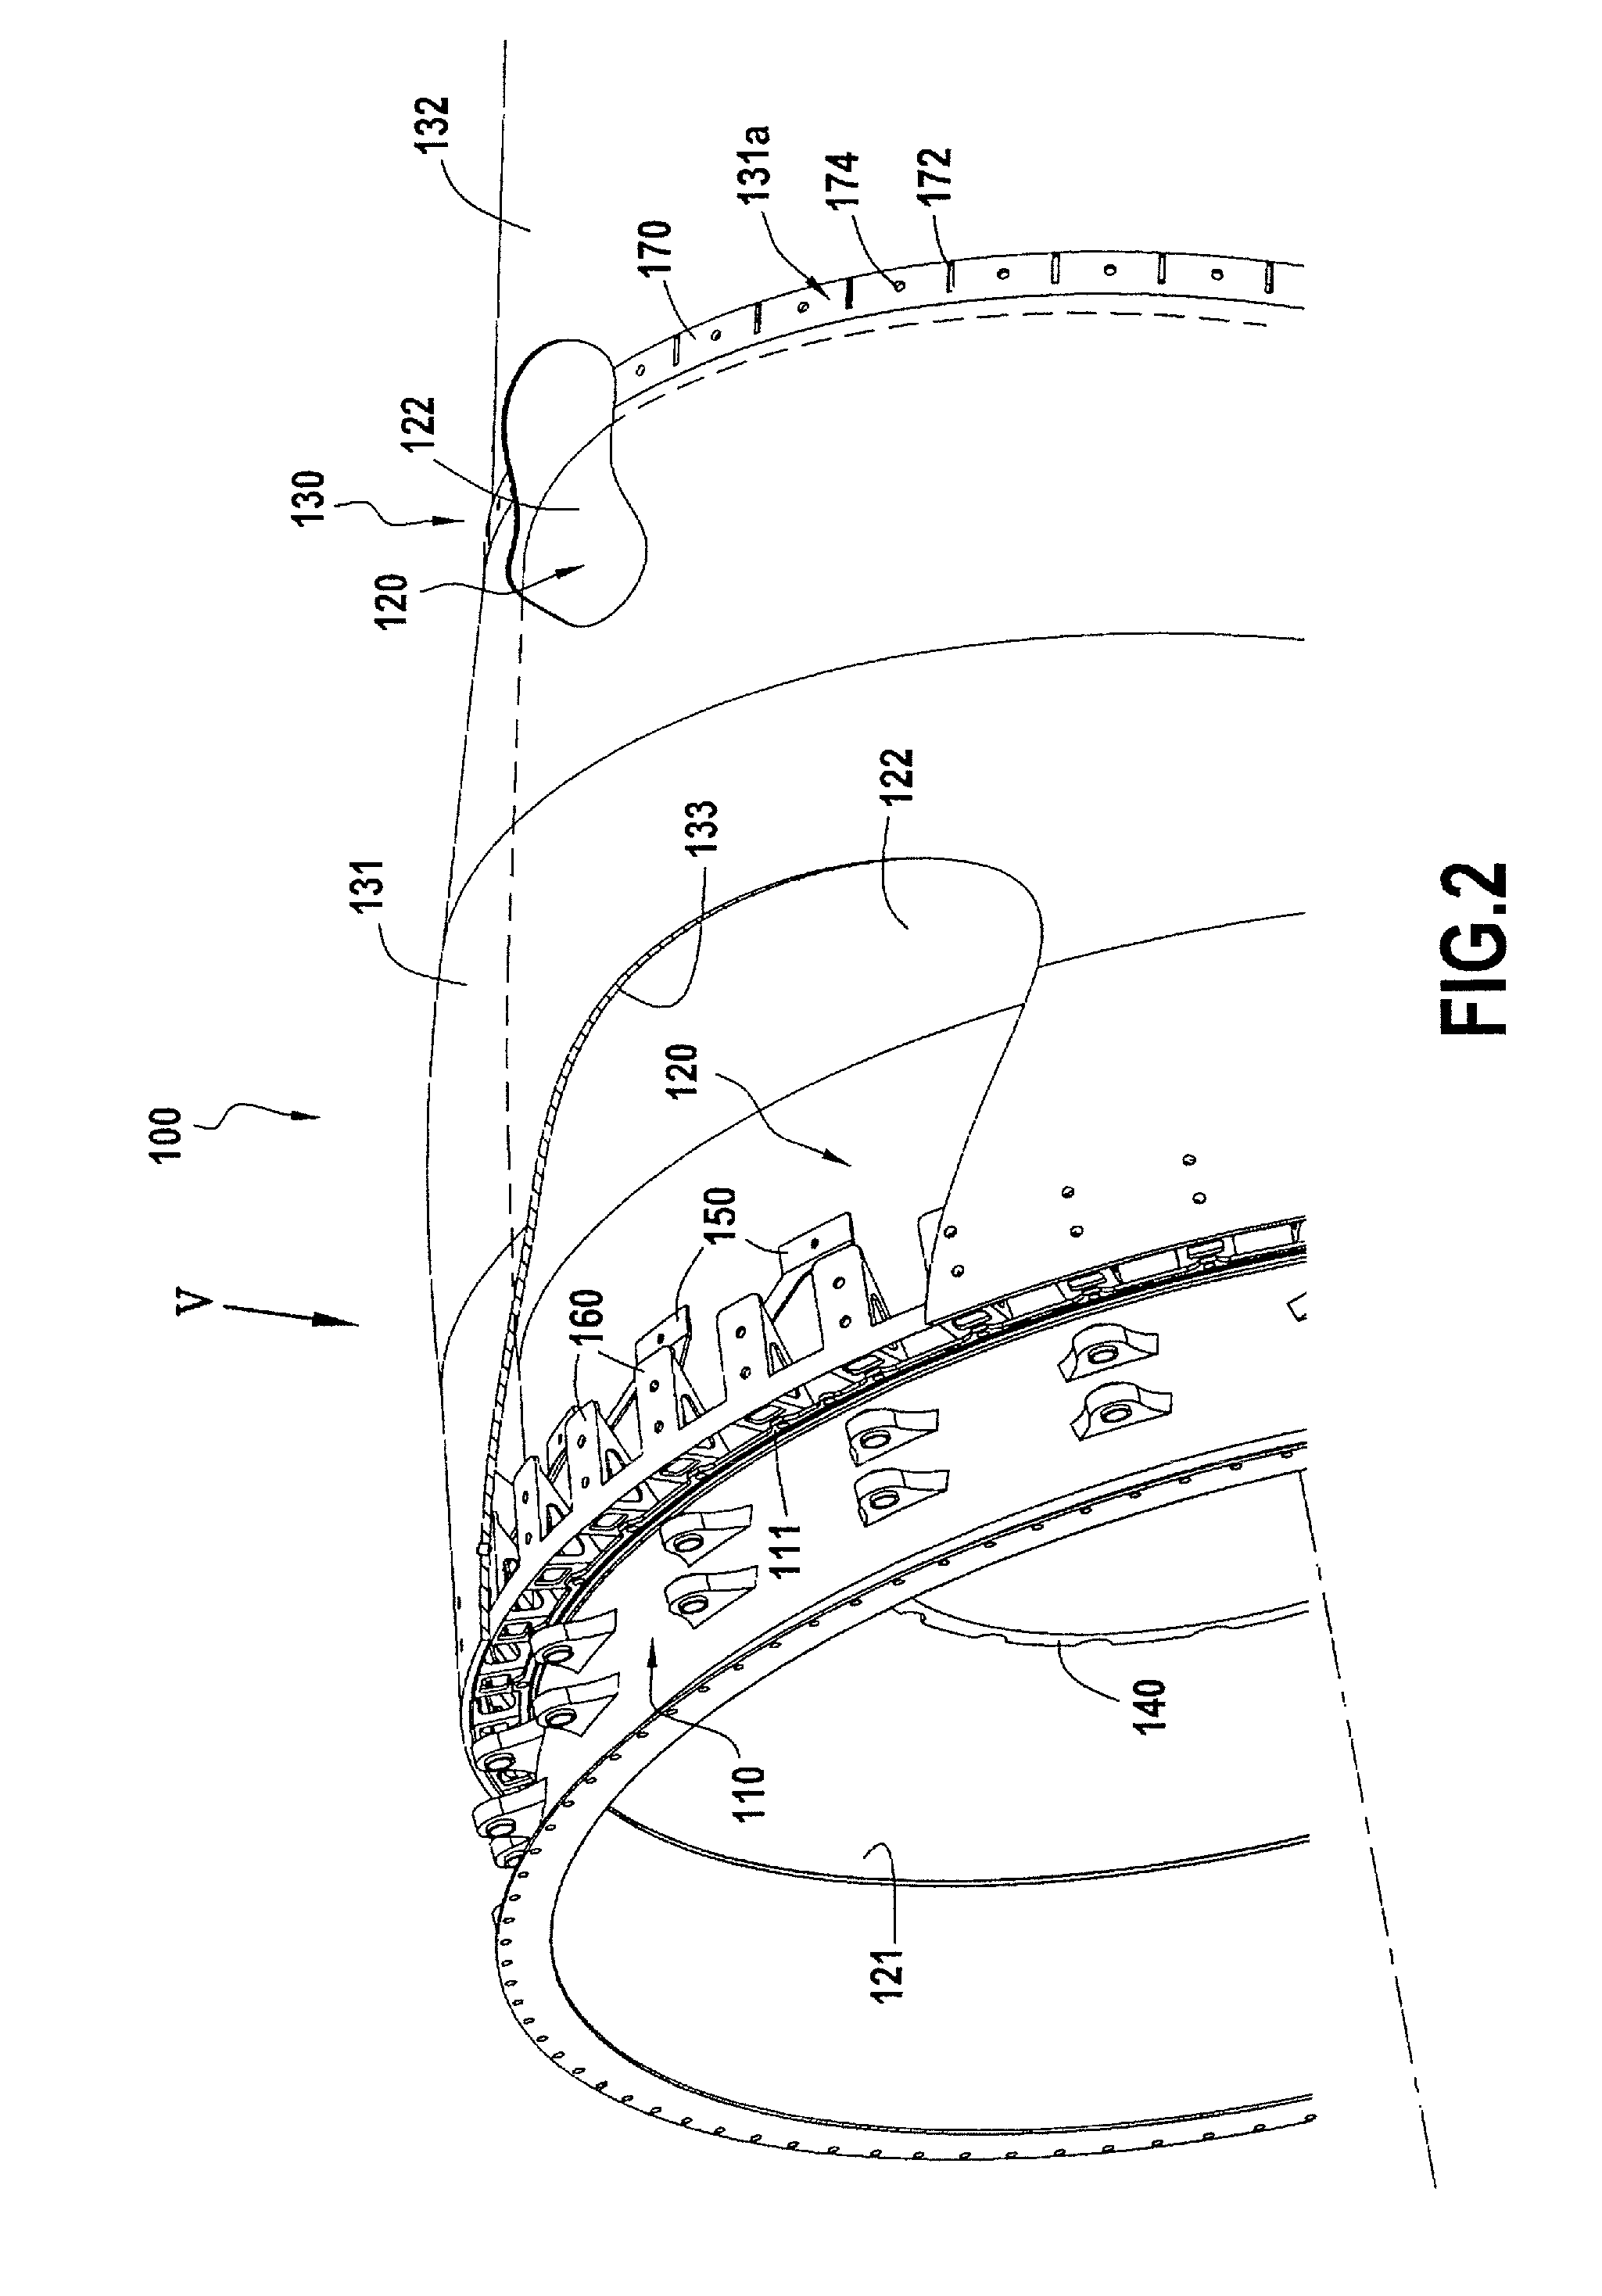 Exhaust system for gas turbine